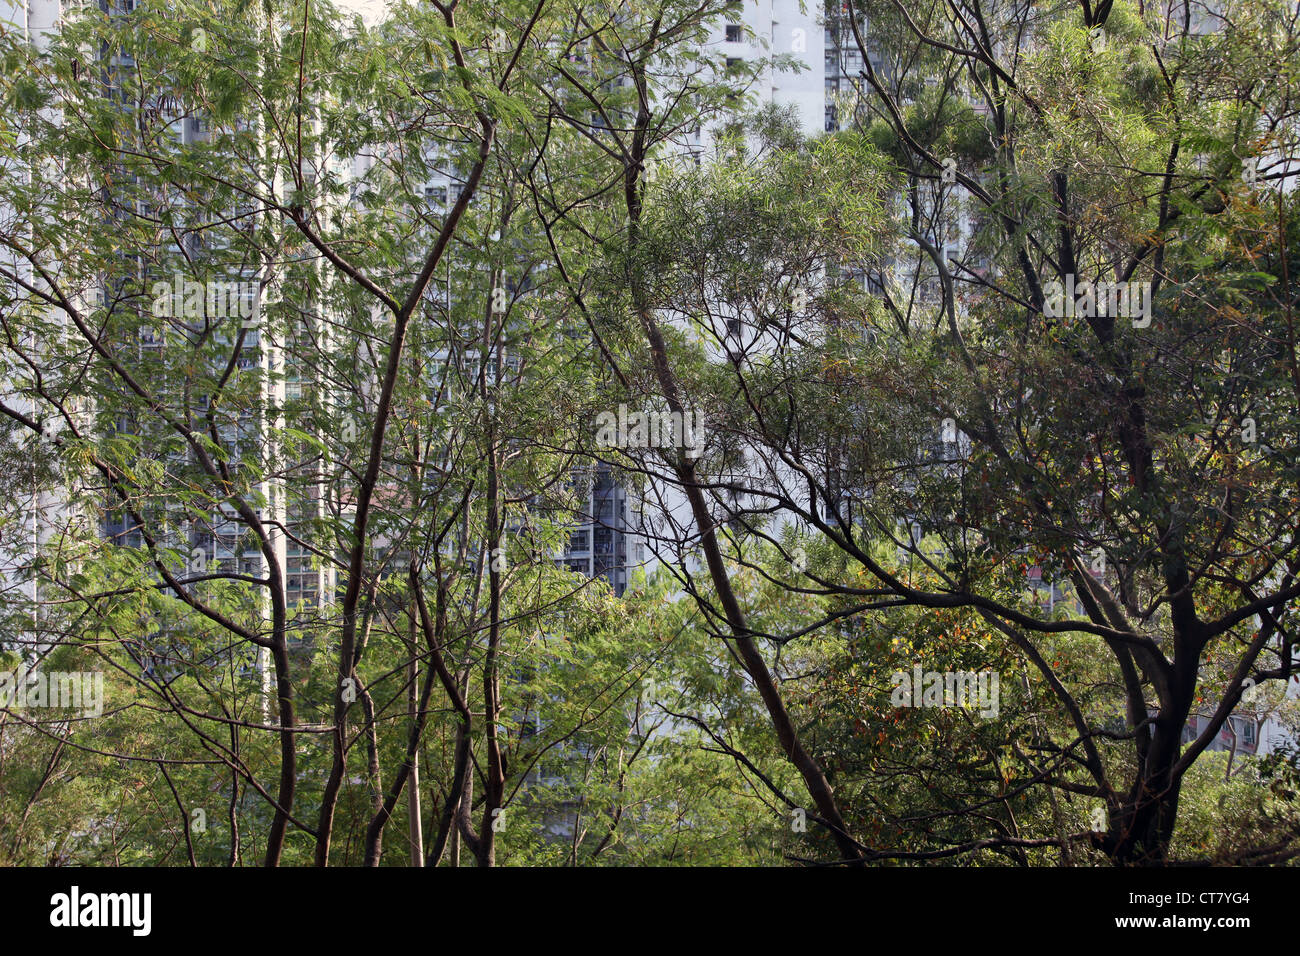 It's a photo of Hong Kong tower we can see though the trees and bushes. Pic took from a walk way in a hill Stock Photo